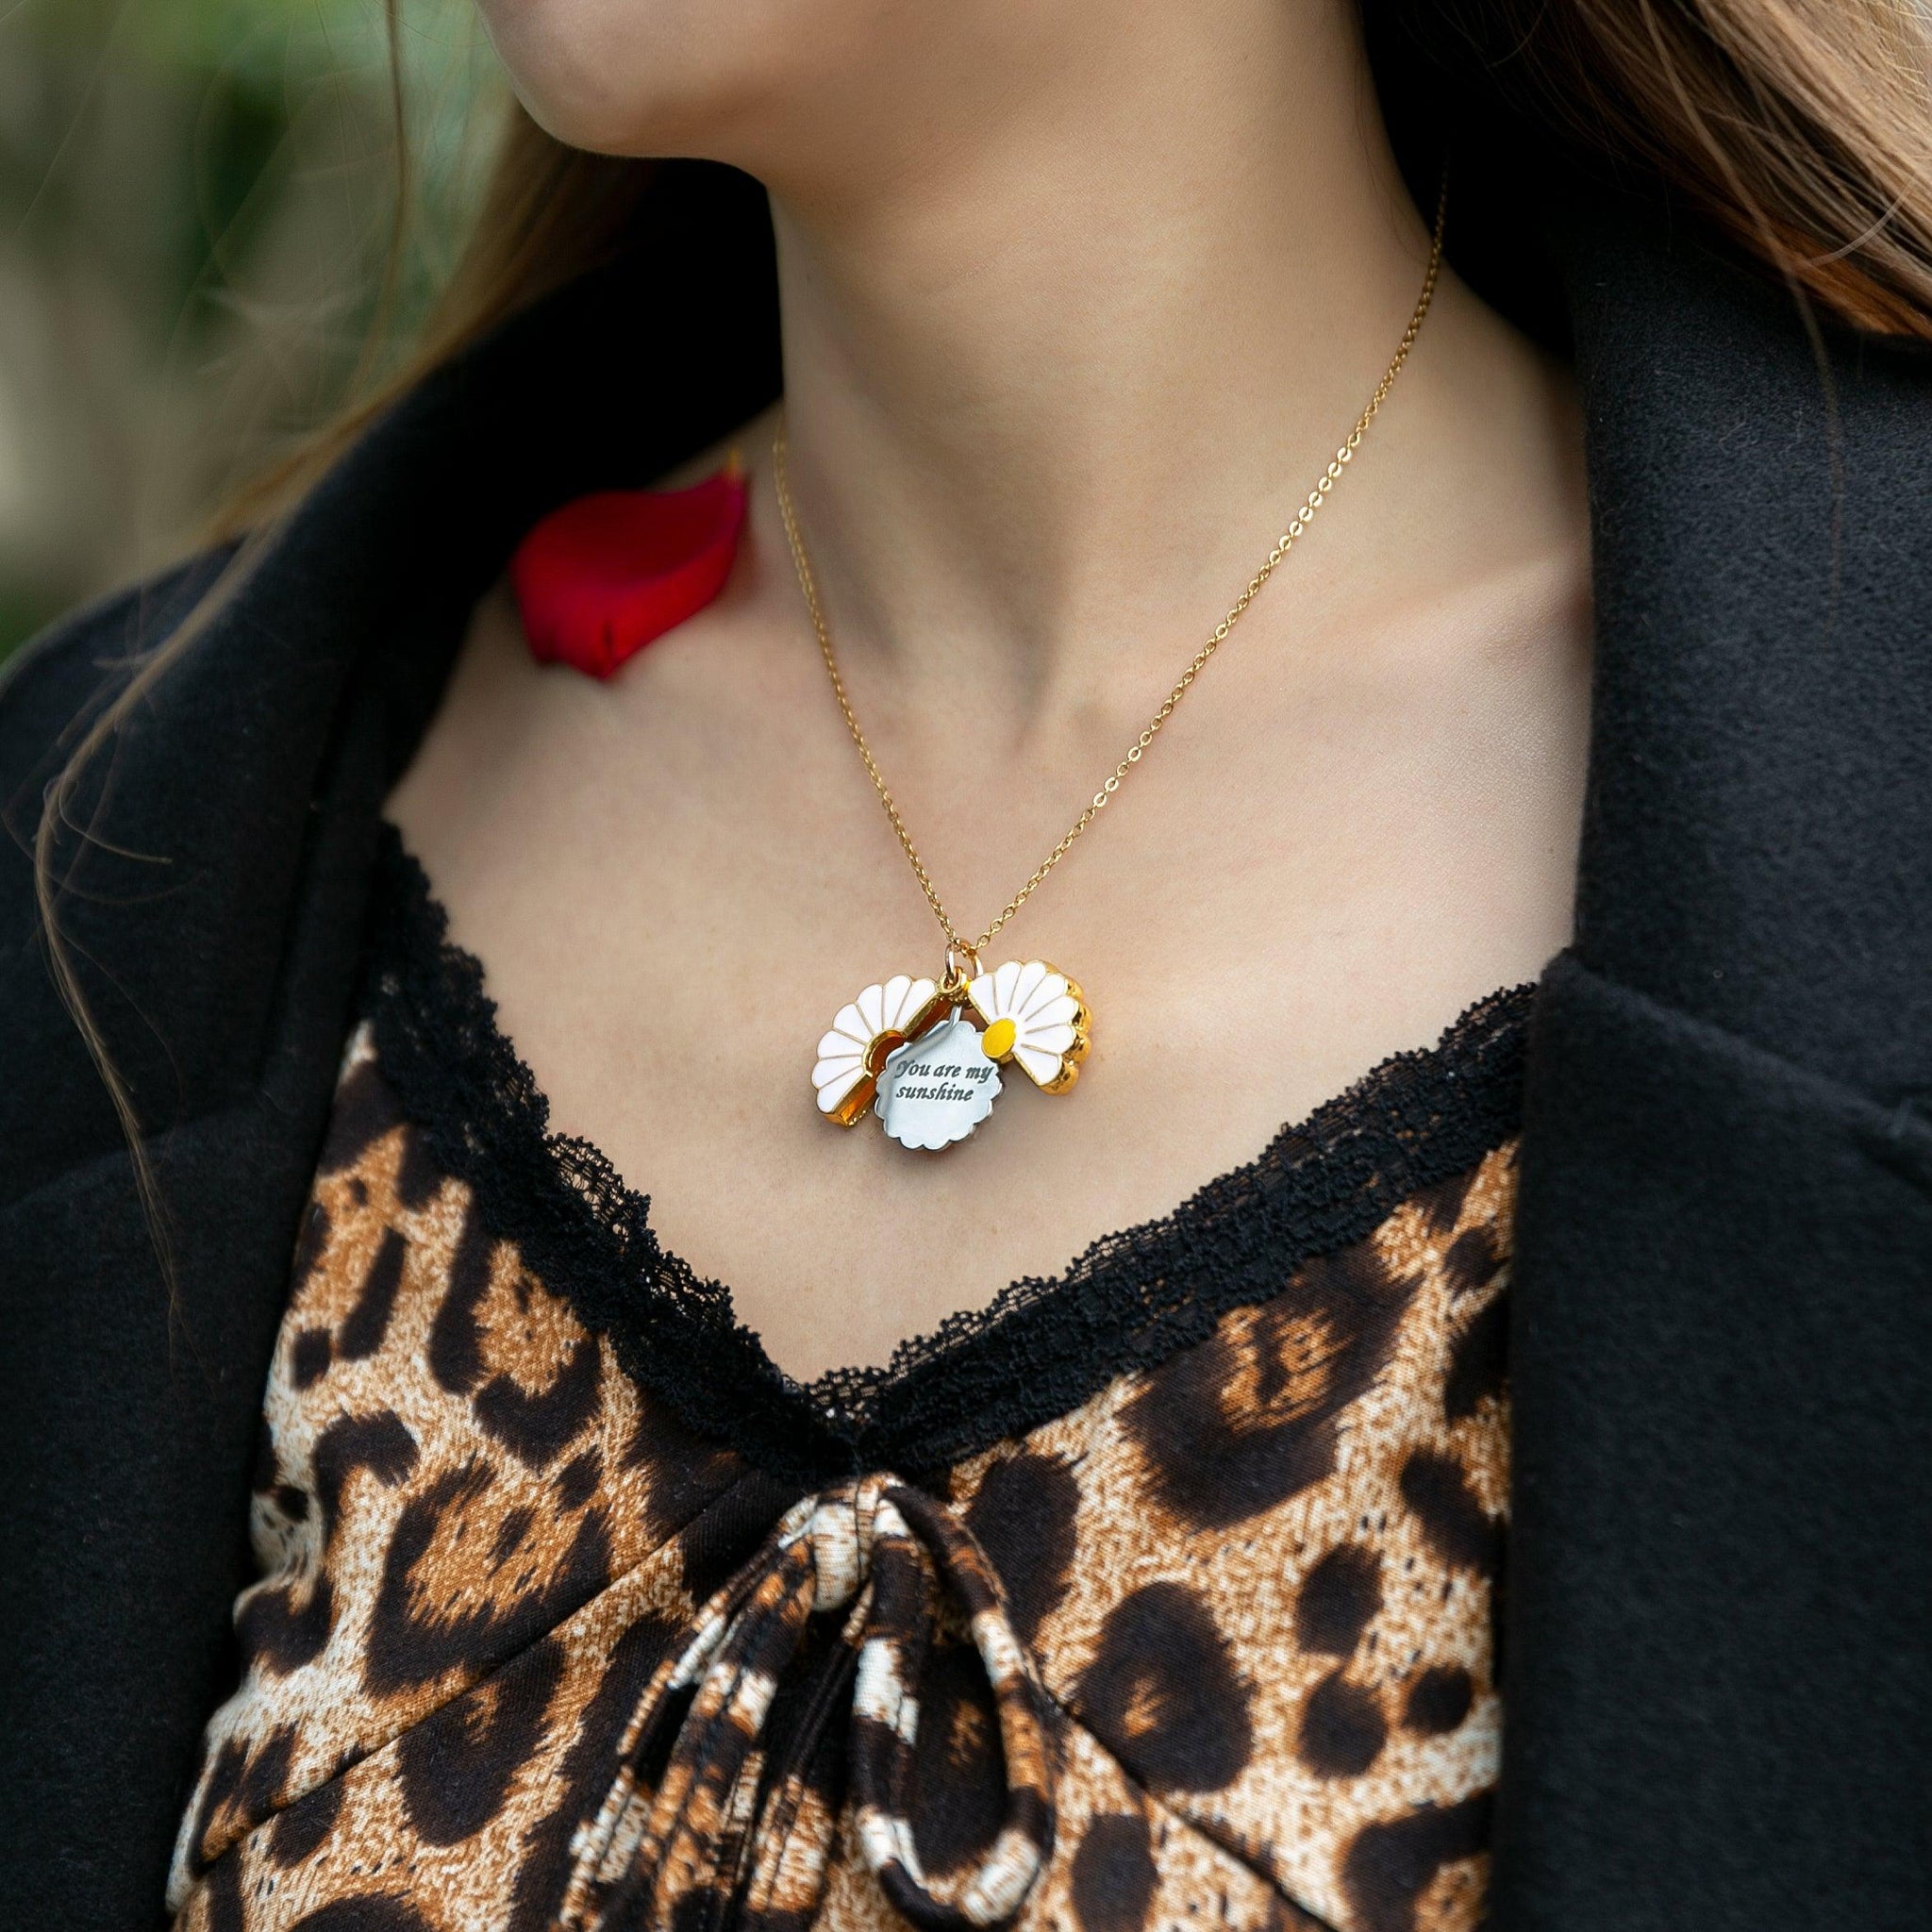 Adopt a Queen - "Sunshine" Necklace - The Project Honey Bees